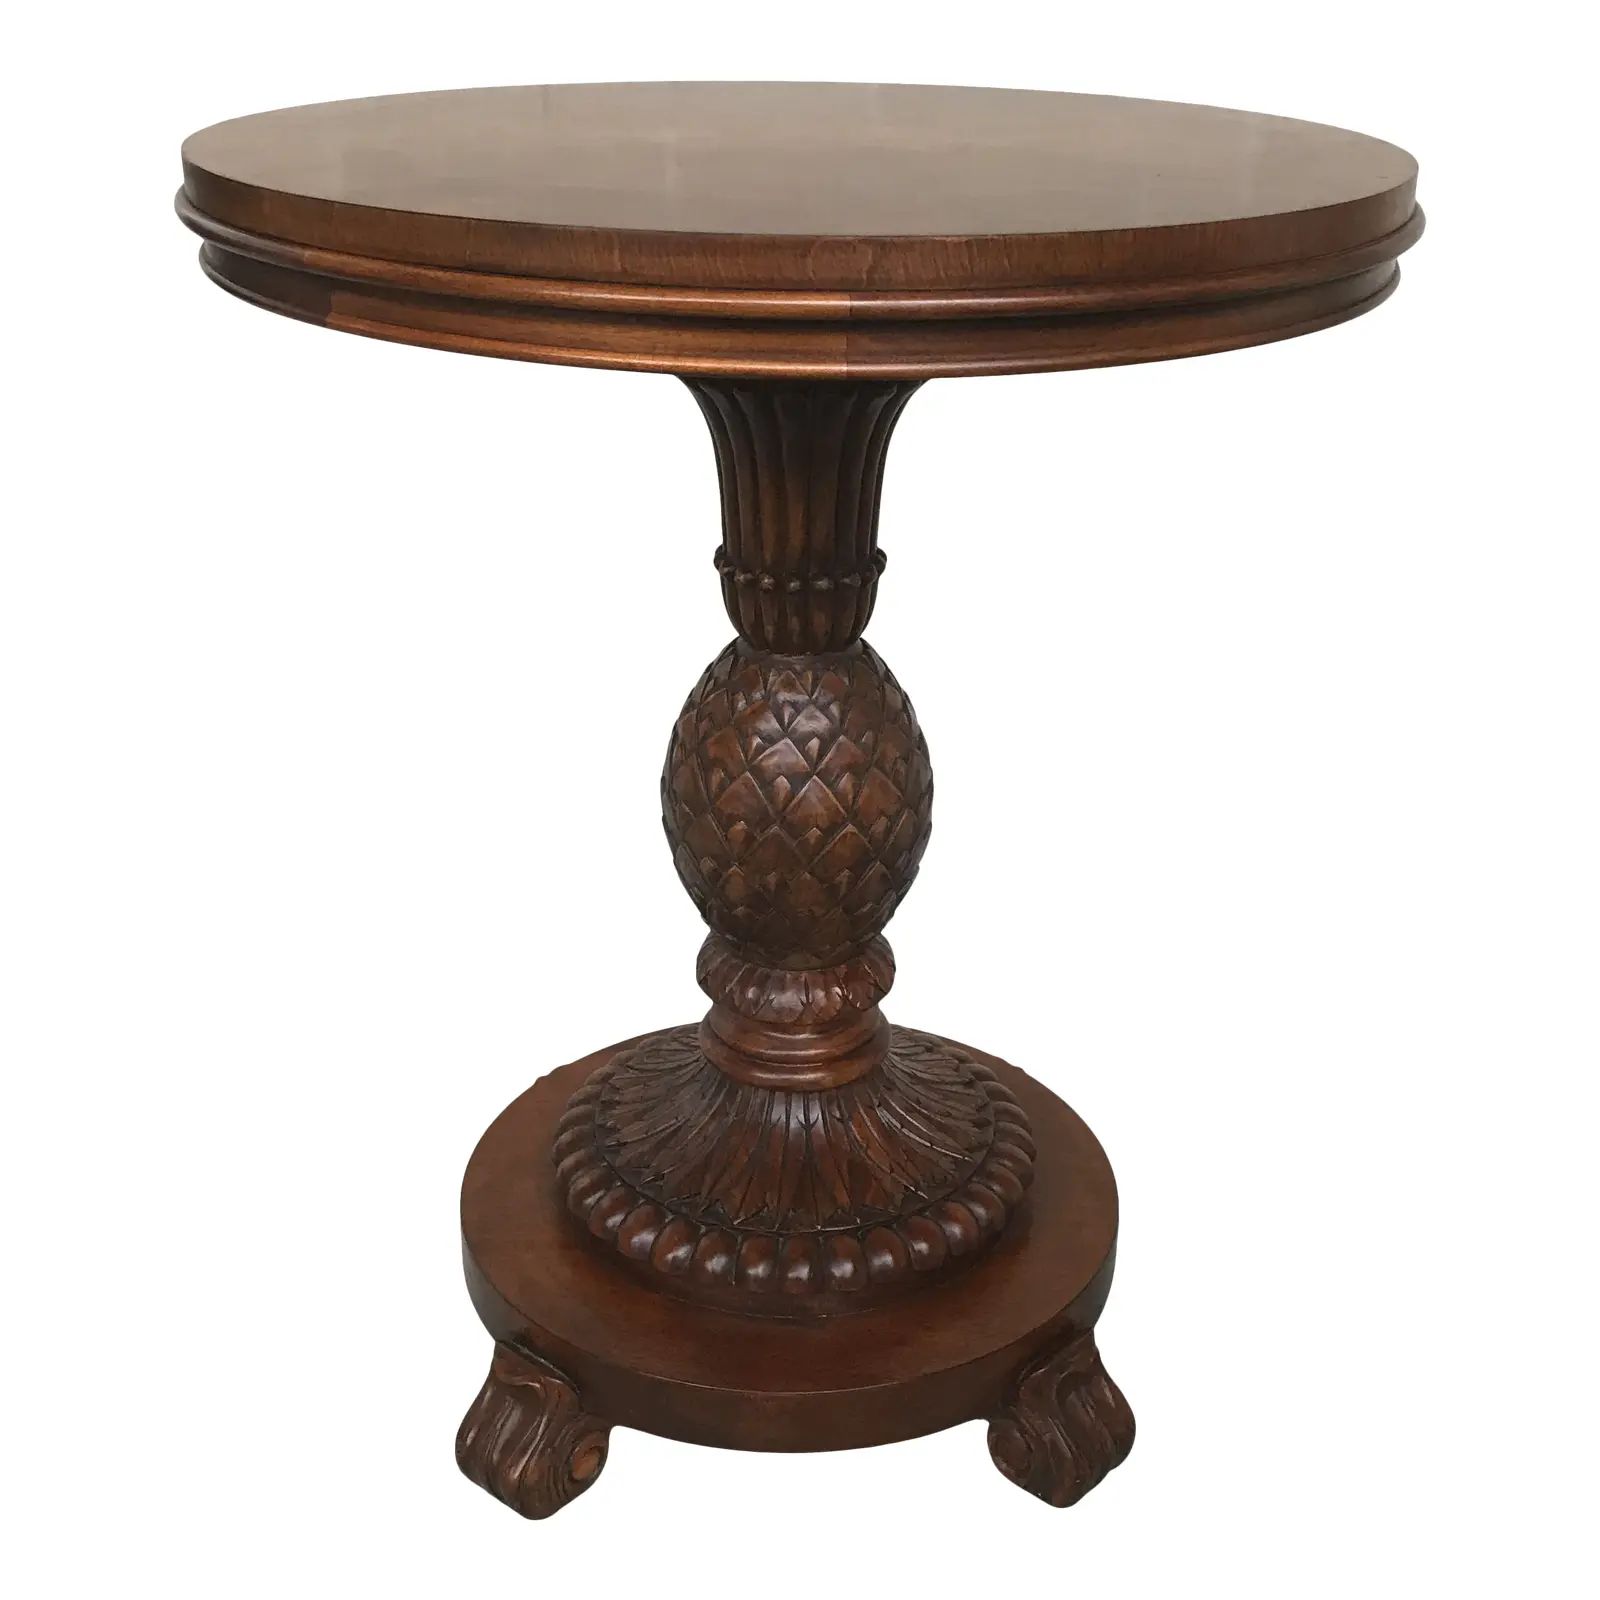 Ethan Allen Round Table With Pineapple Shape Carved Trunk | Chairish